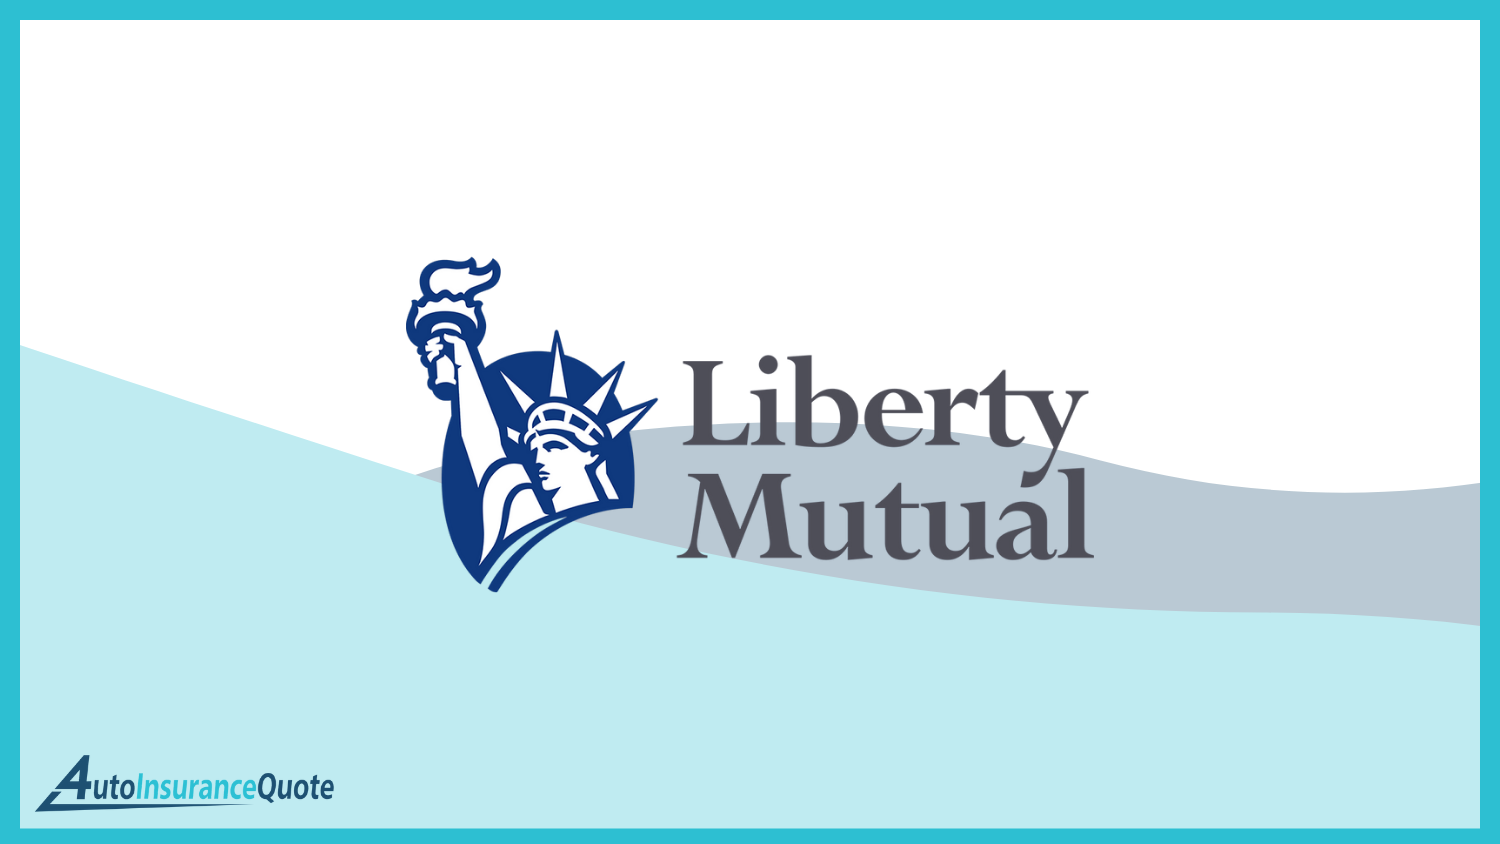 Liberty mutual Best Auto Insurance Companies That Do Not Monitor Your Driving